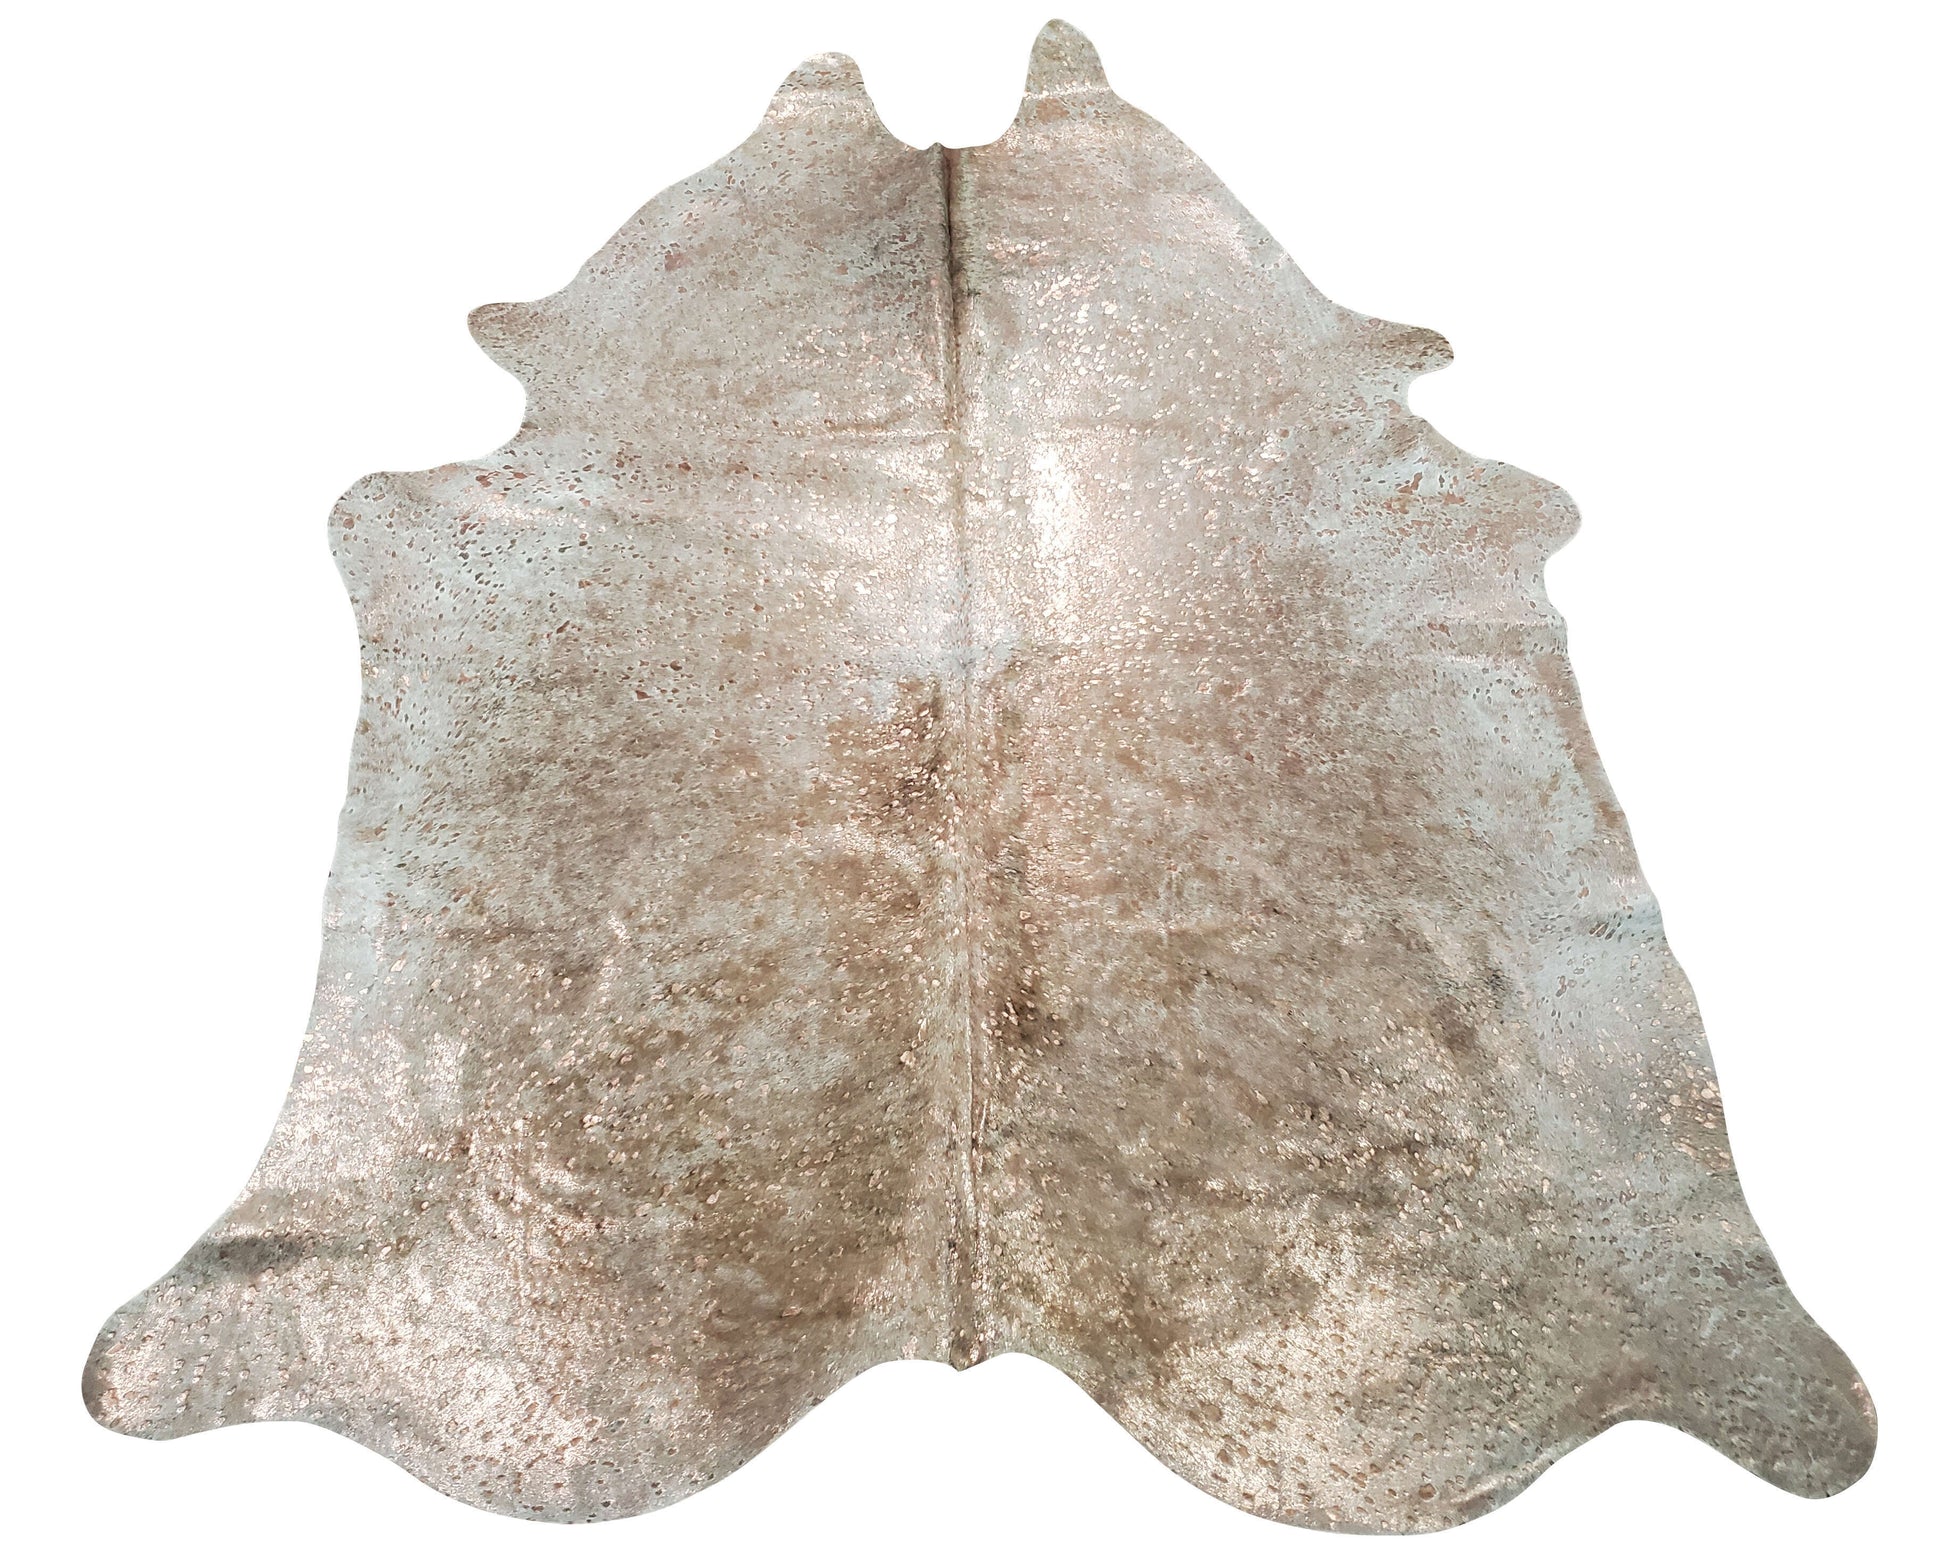 You will absolutely love this metallic cowhide rug, the colors are warm and vibrant, It is comfortably dense and well made.